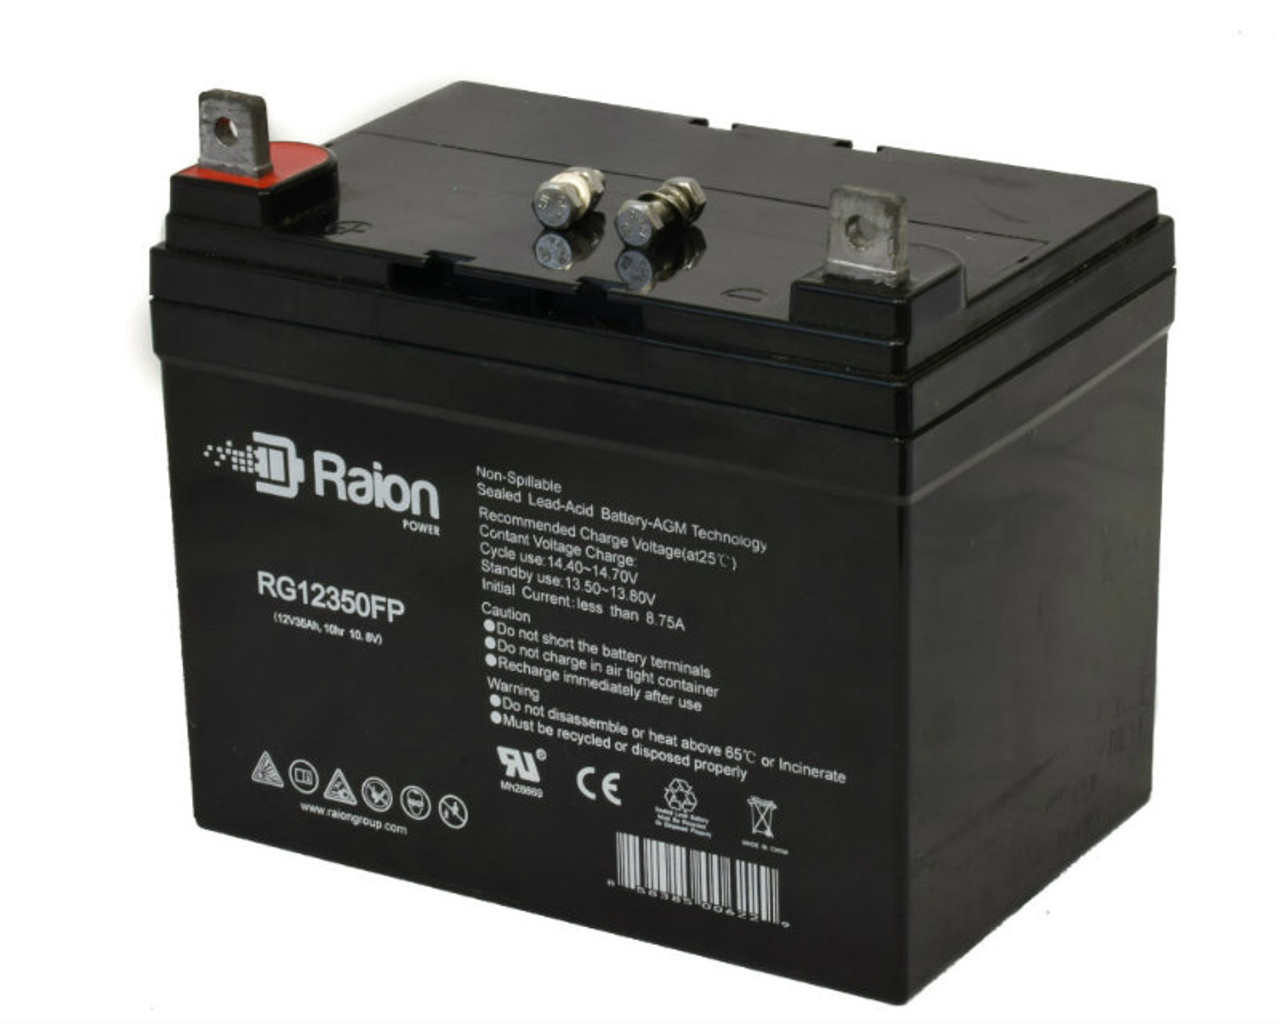 Raion Power Replacement 12V 35Ah RG12350FP Battery for Speedex Tractor 1640